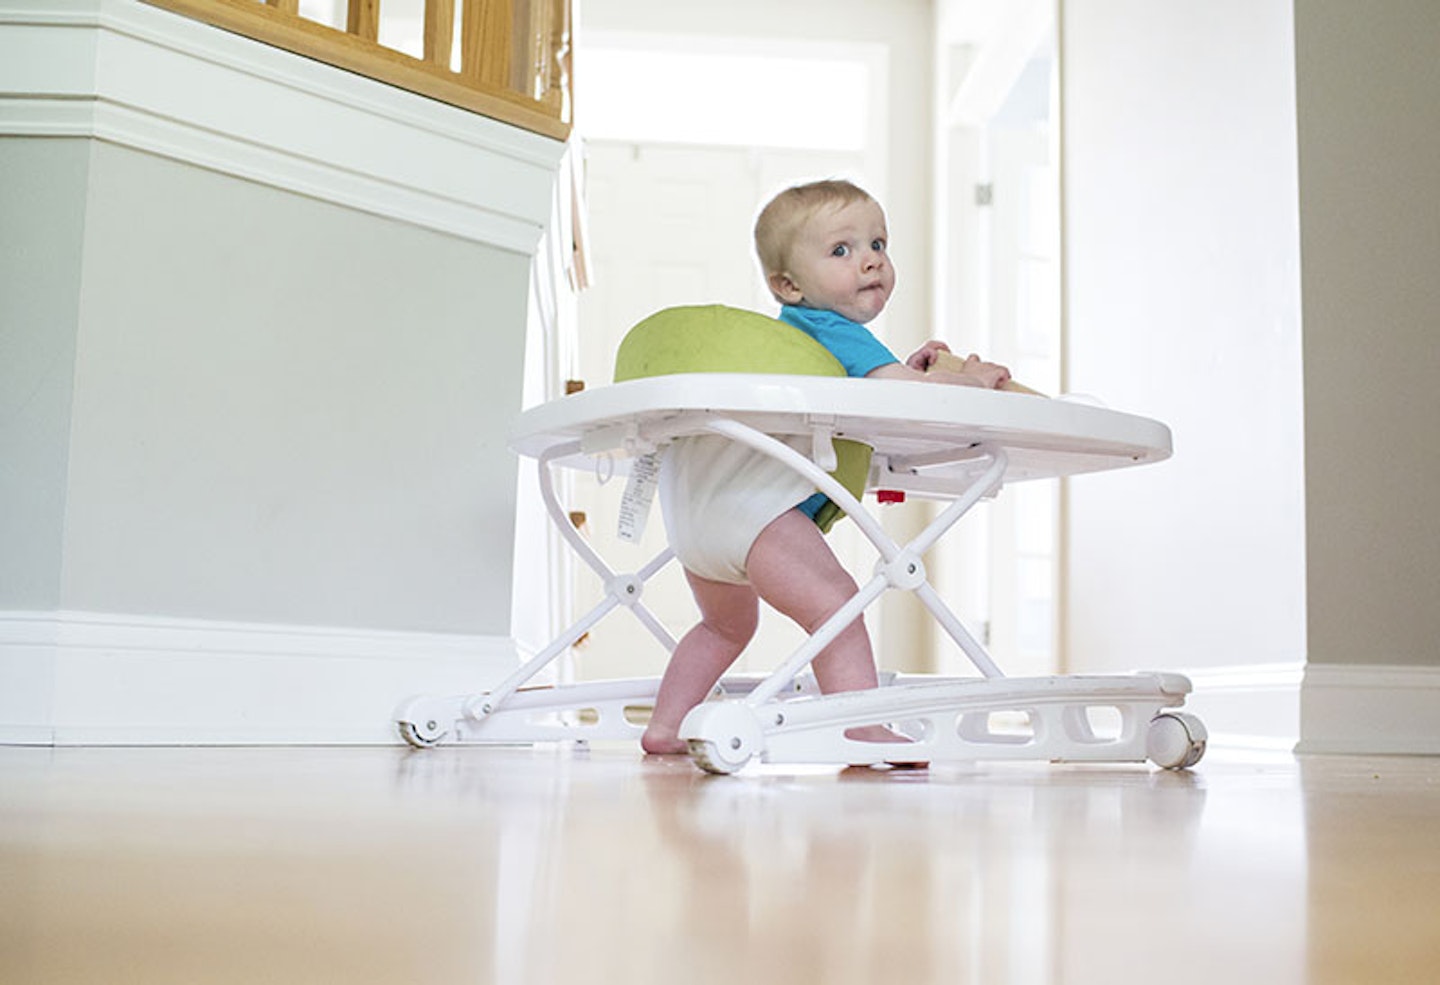 Buy JoJo Maman Bébé Wooden Baby Walker with Colourful Blocks from